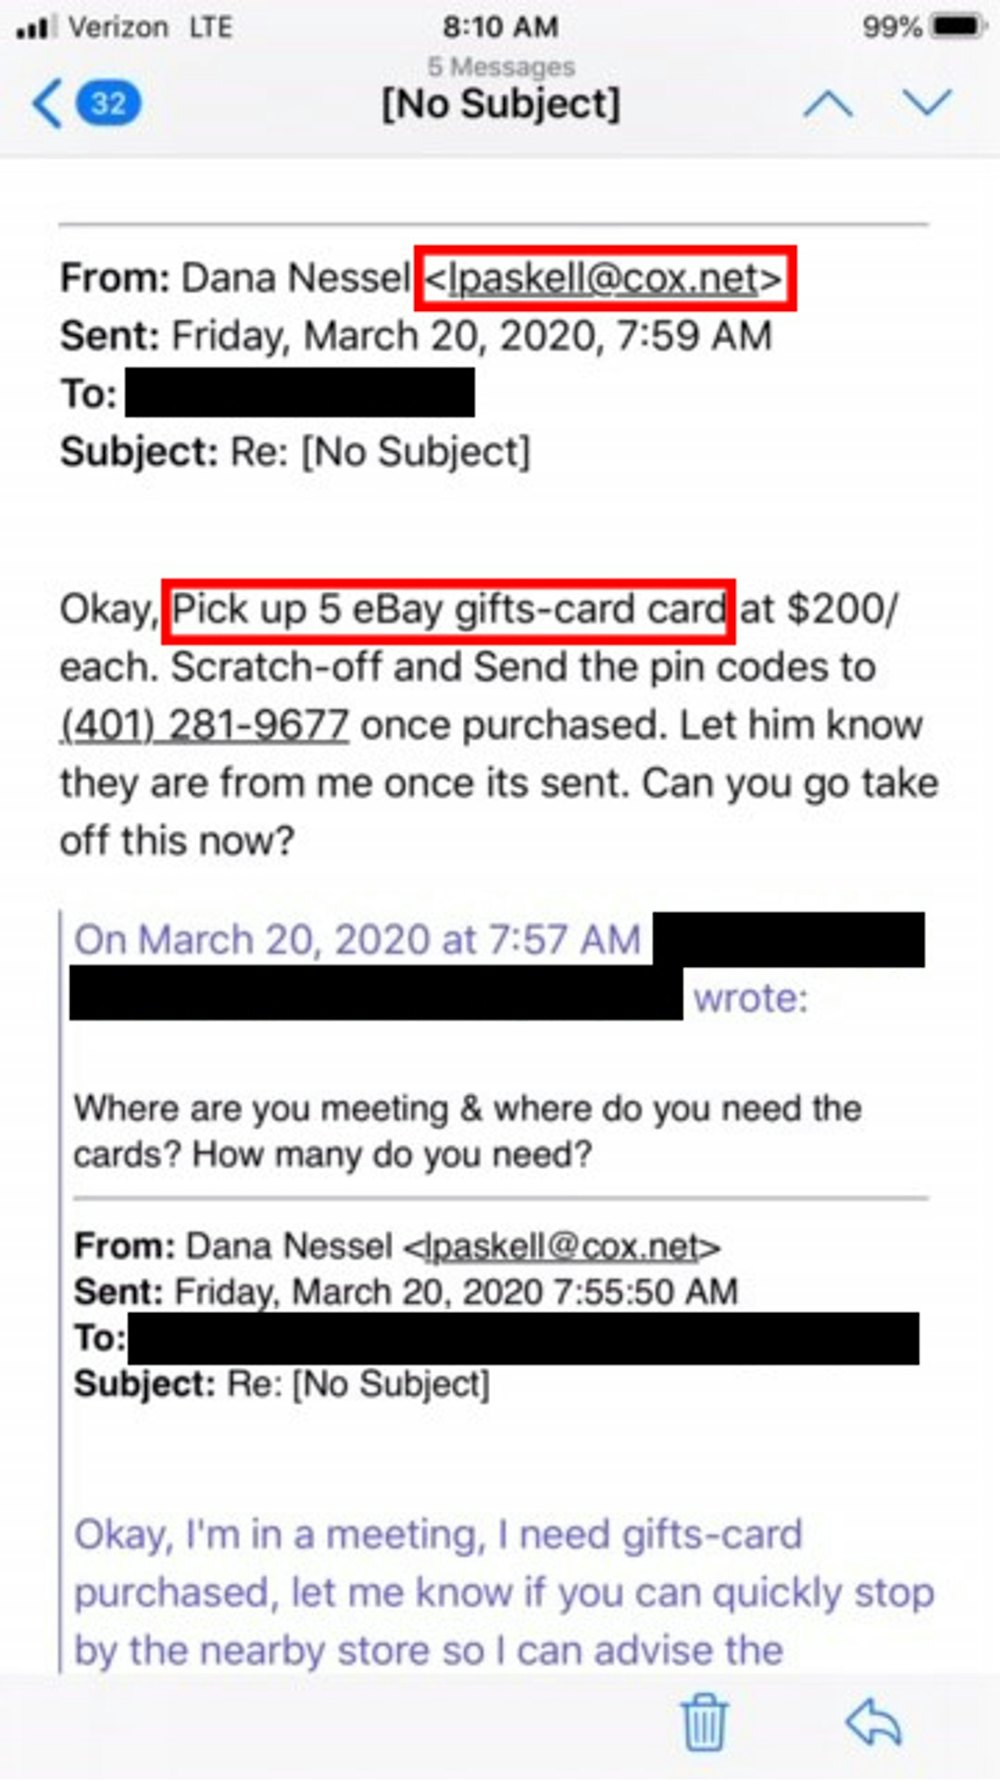 Example of eBay gift card scam.